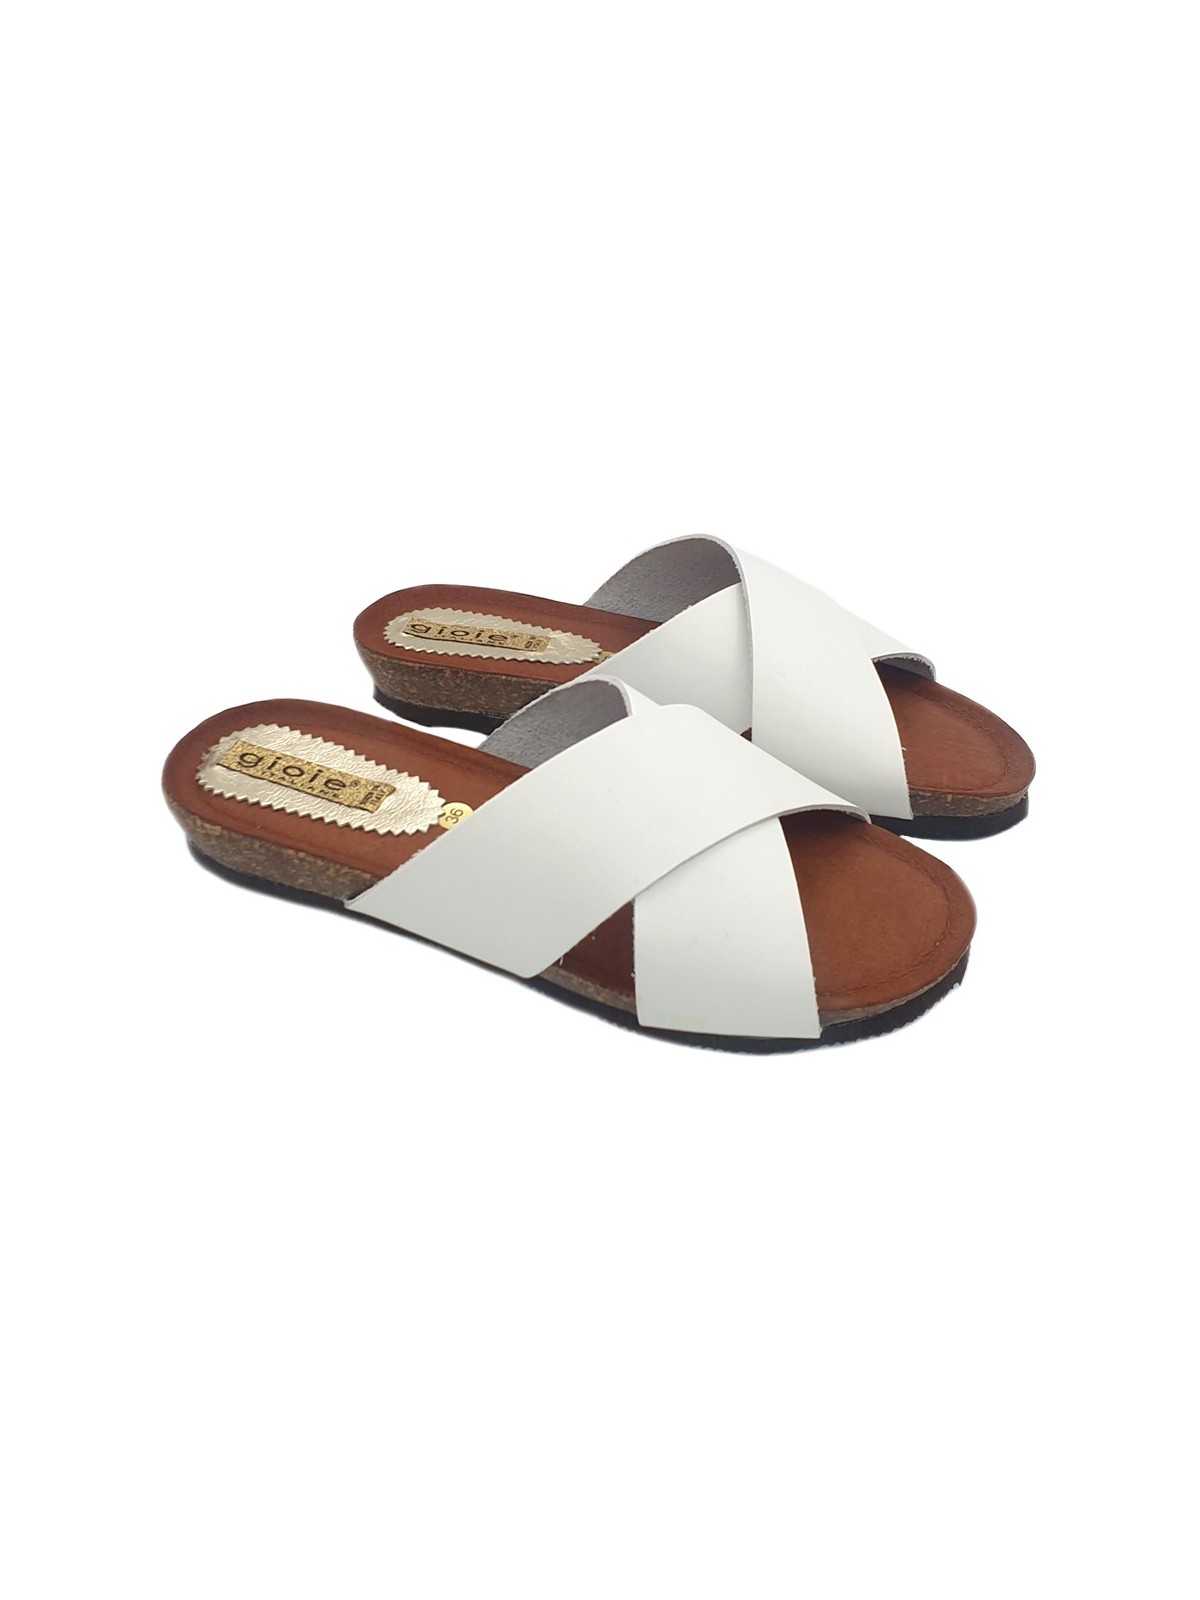 FLAT SANDALS WHITE IN LEATHER